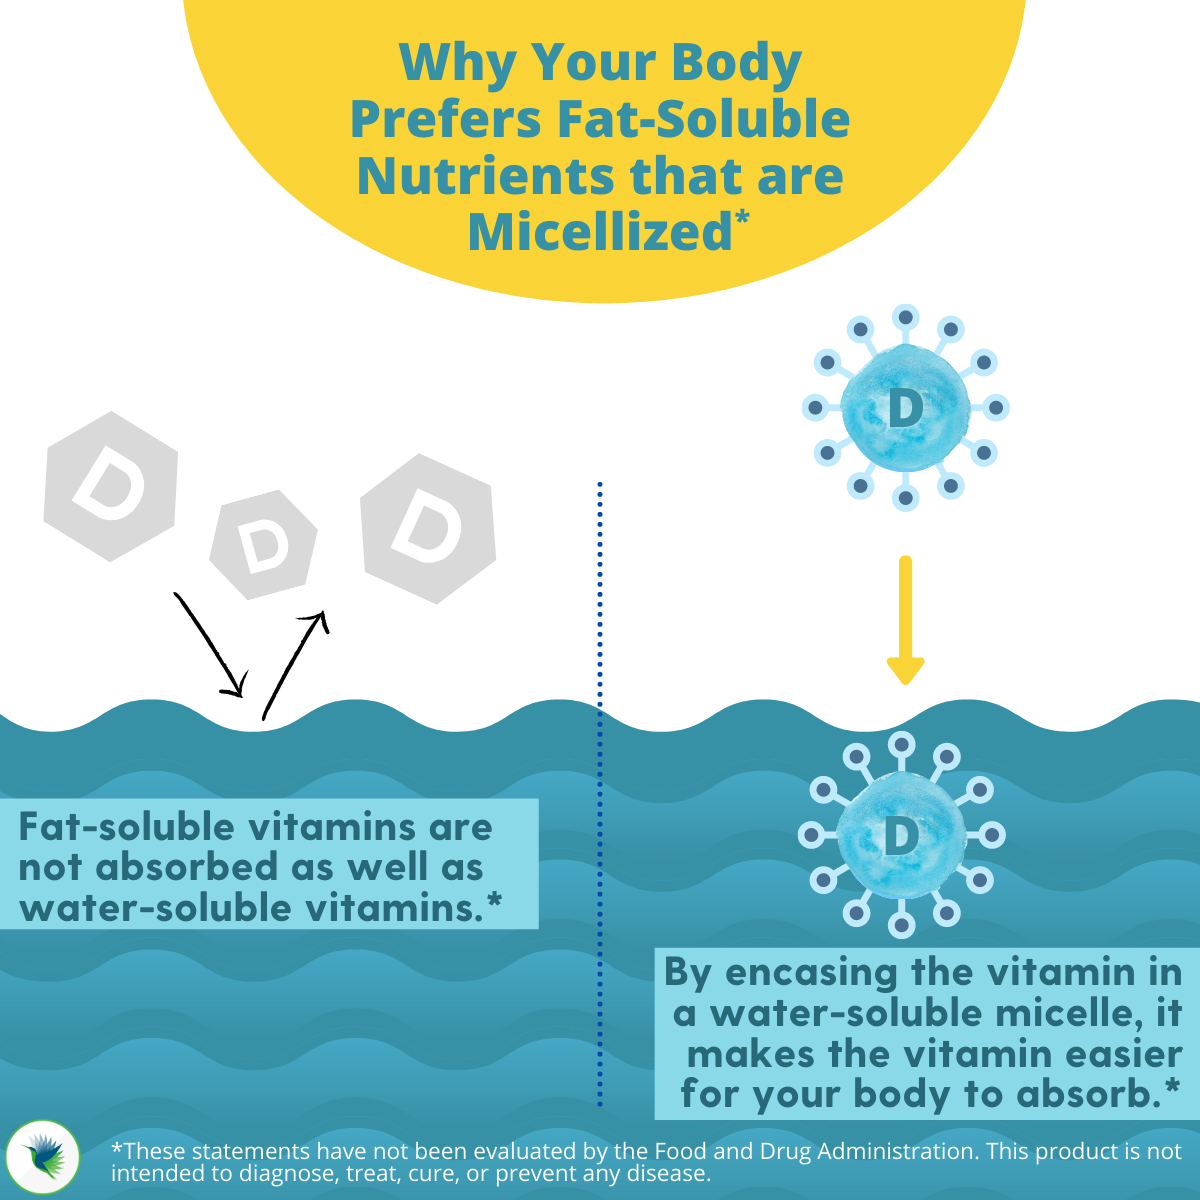 Your Body Prefers Micellized Fat Soluble Nutrients